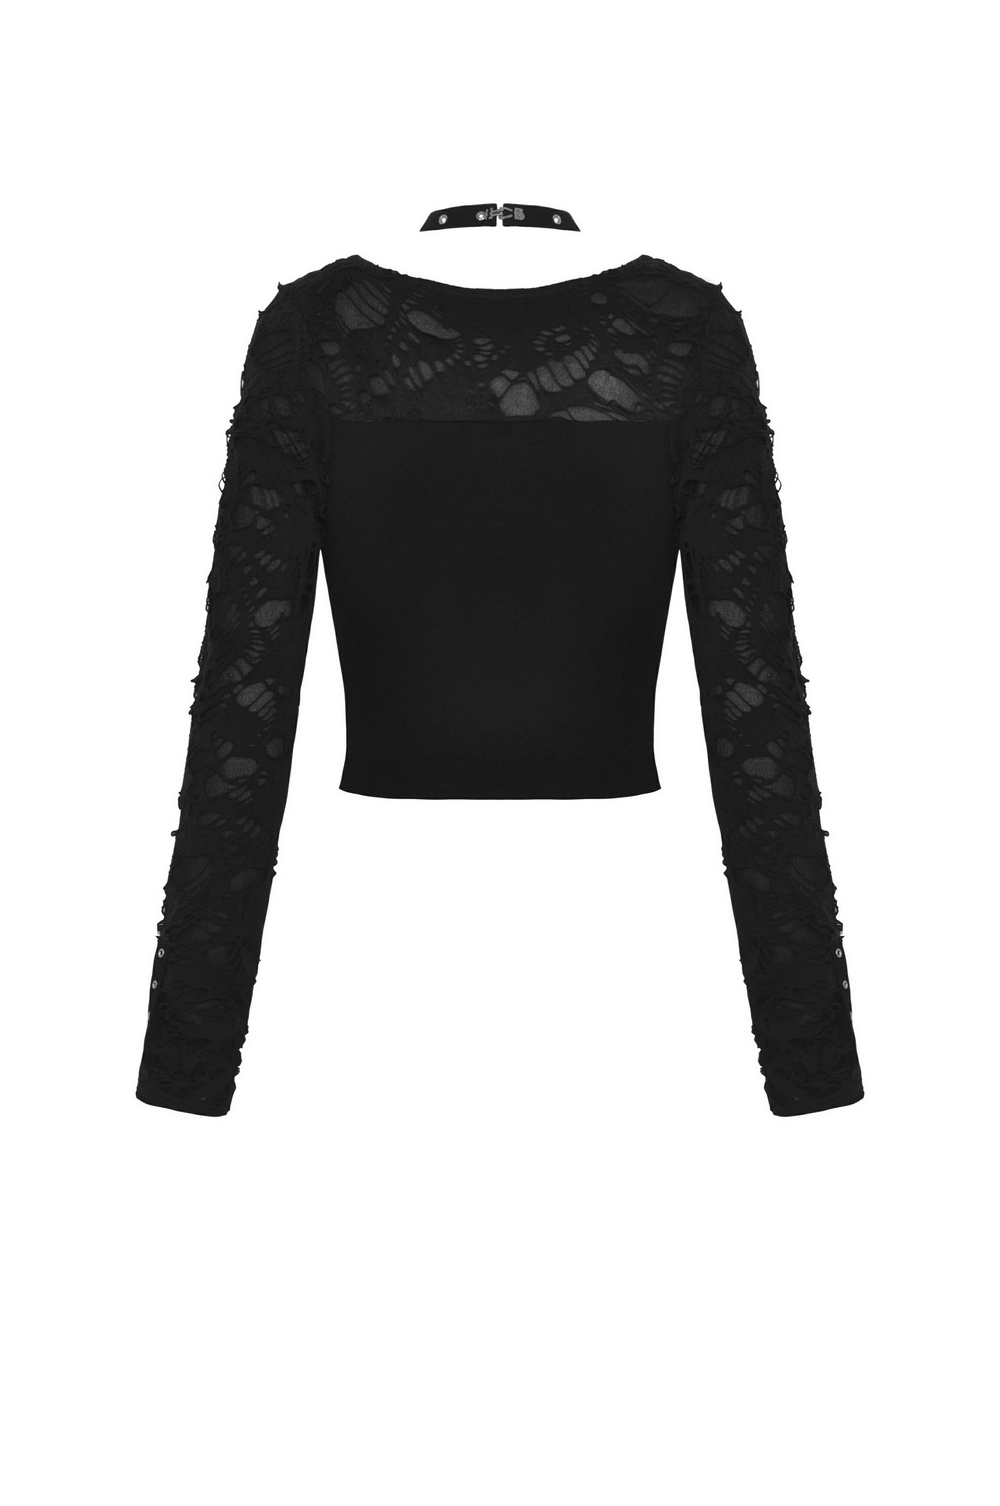 Ripped Long Sleeves Crop Top with Statement Lacing